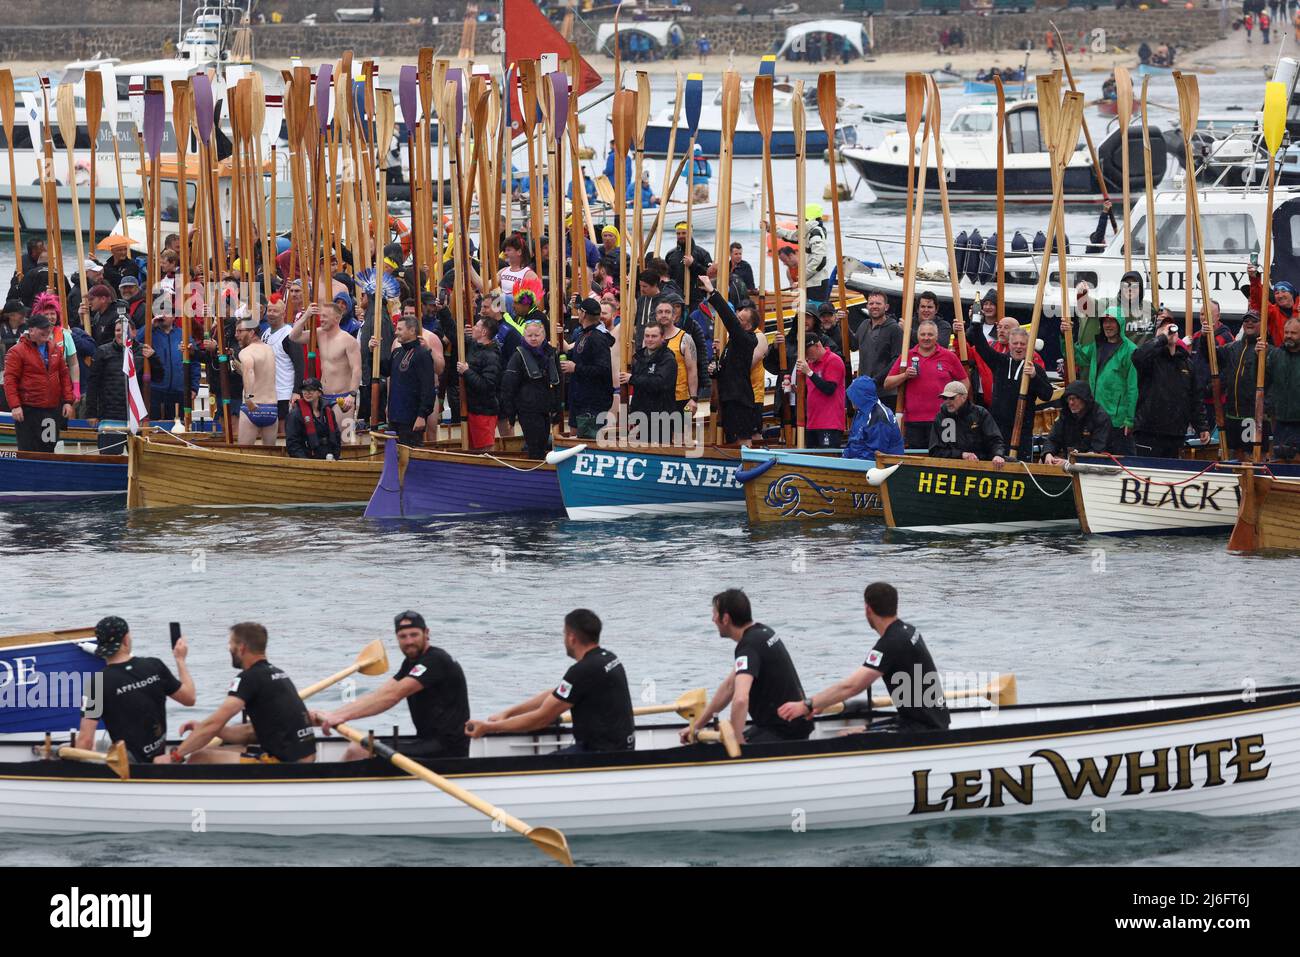 Rowers stand on rafted-up boats during the World Pilot Gig rowing Championships, in the Isles of Scilly, Britain, May 1, 2022. REUTERS/Tom Nicholson Stock Photo